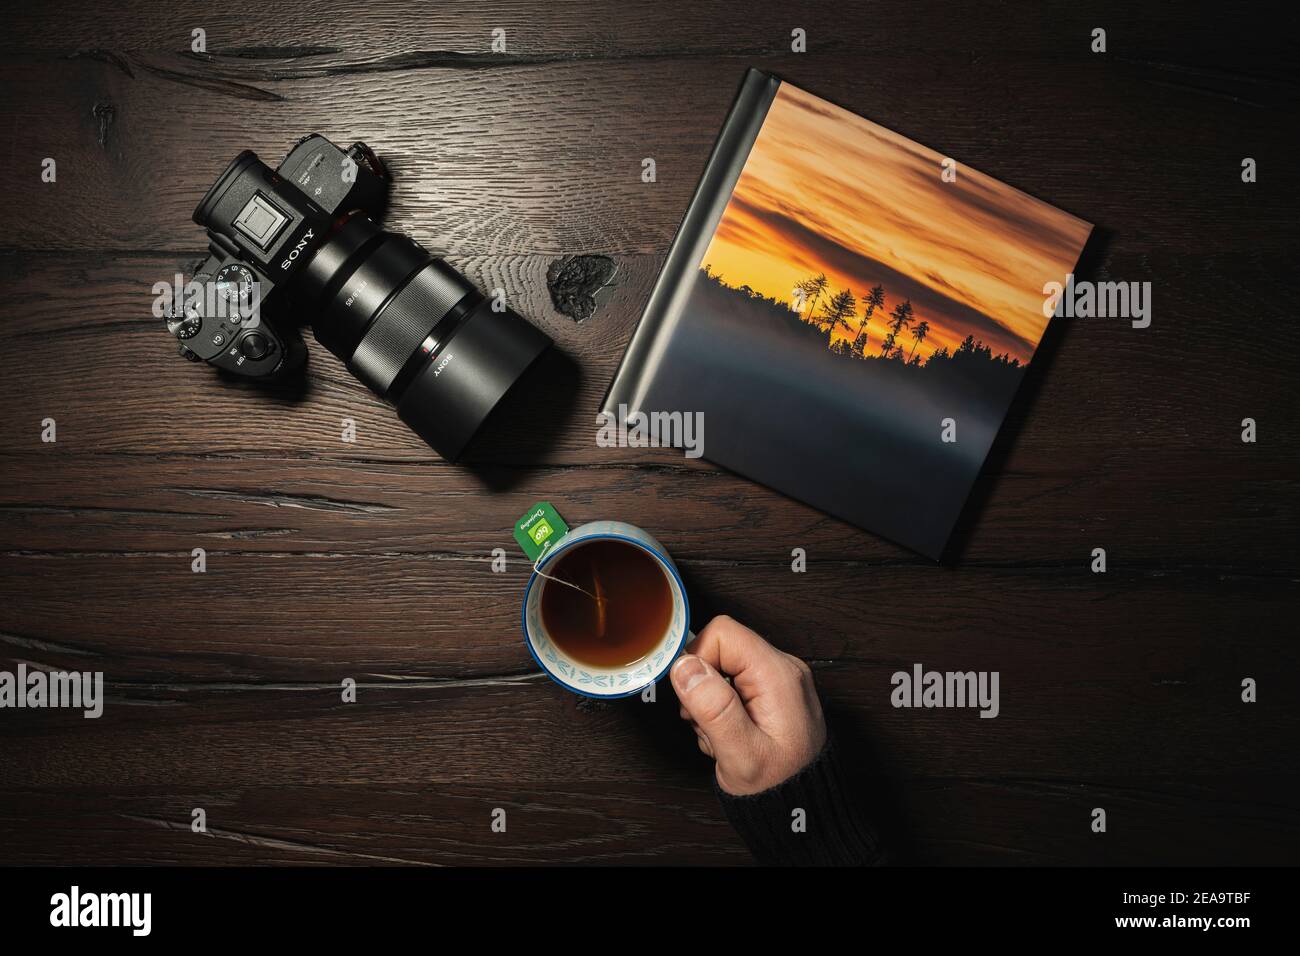 Scene, photo book on table with camera and teacup Stock Photo